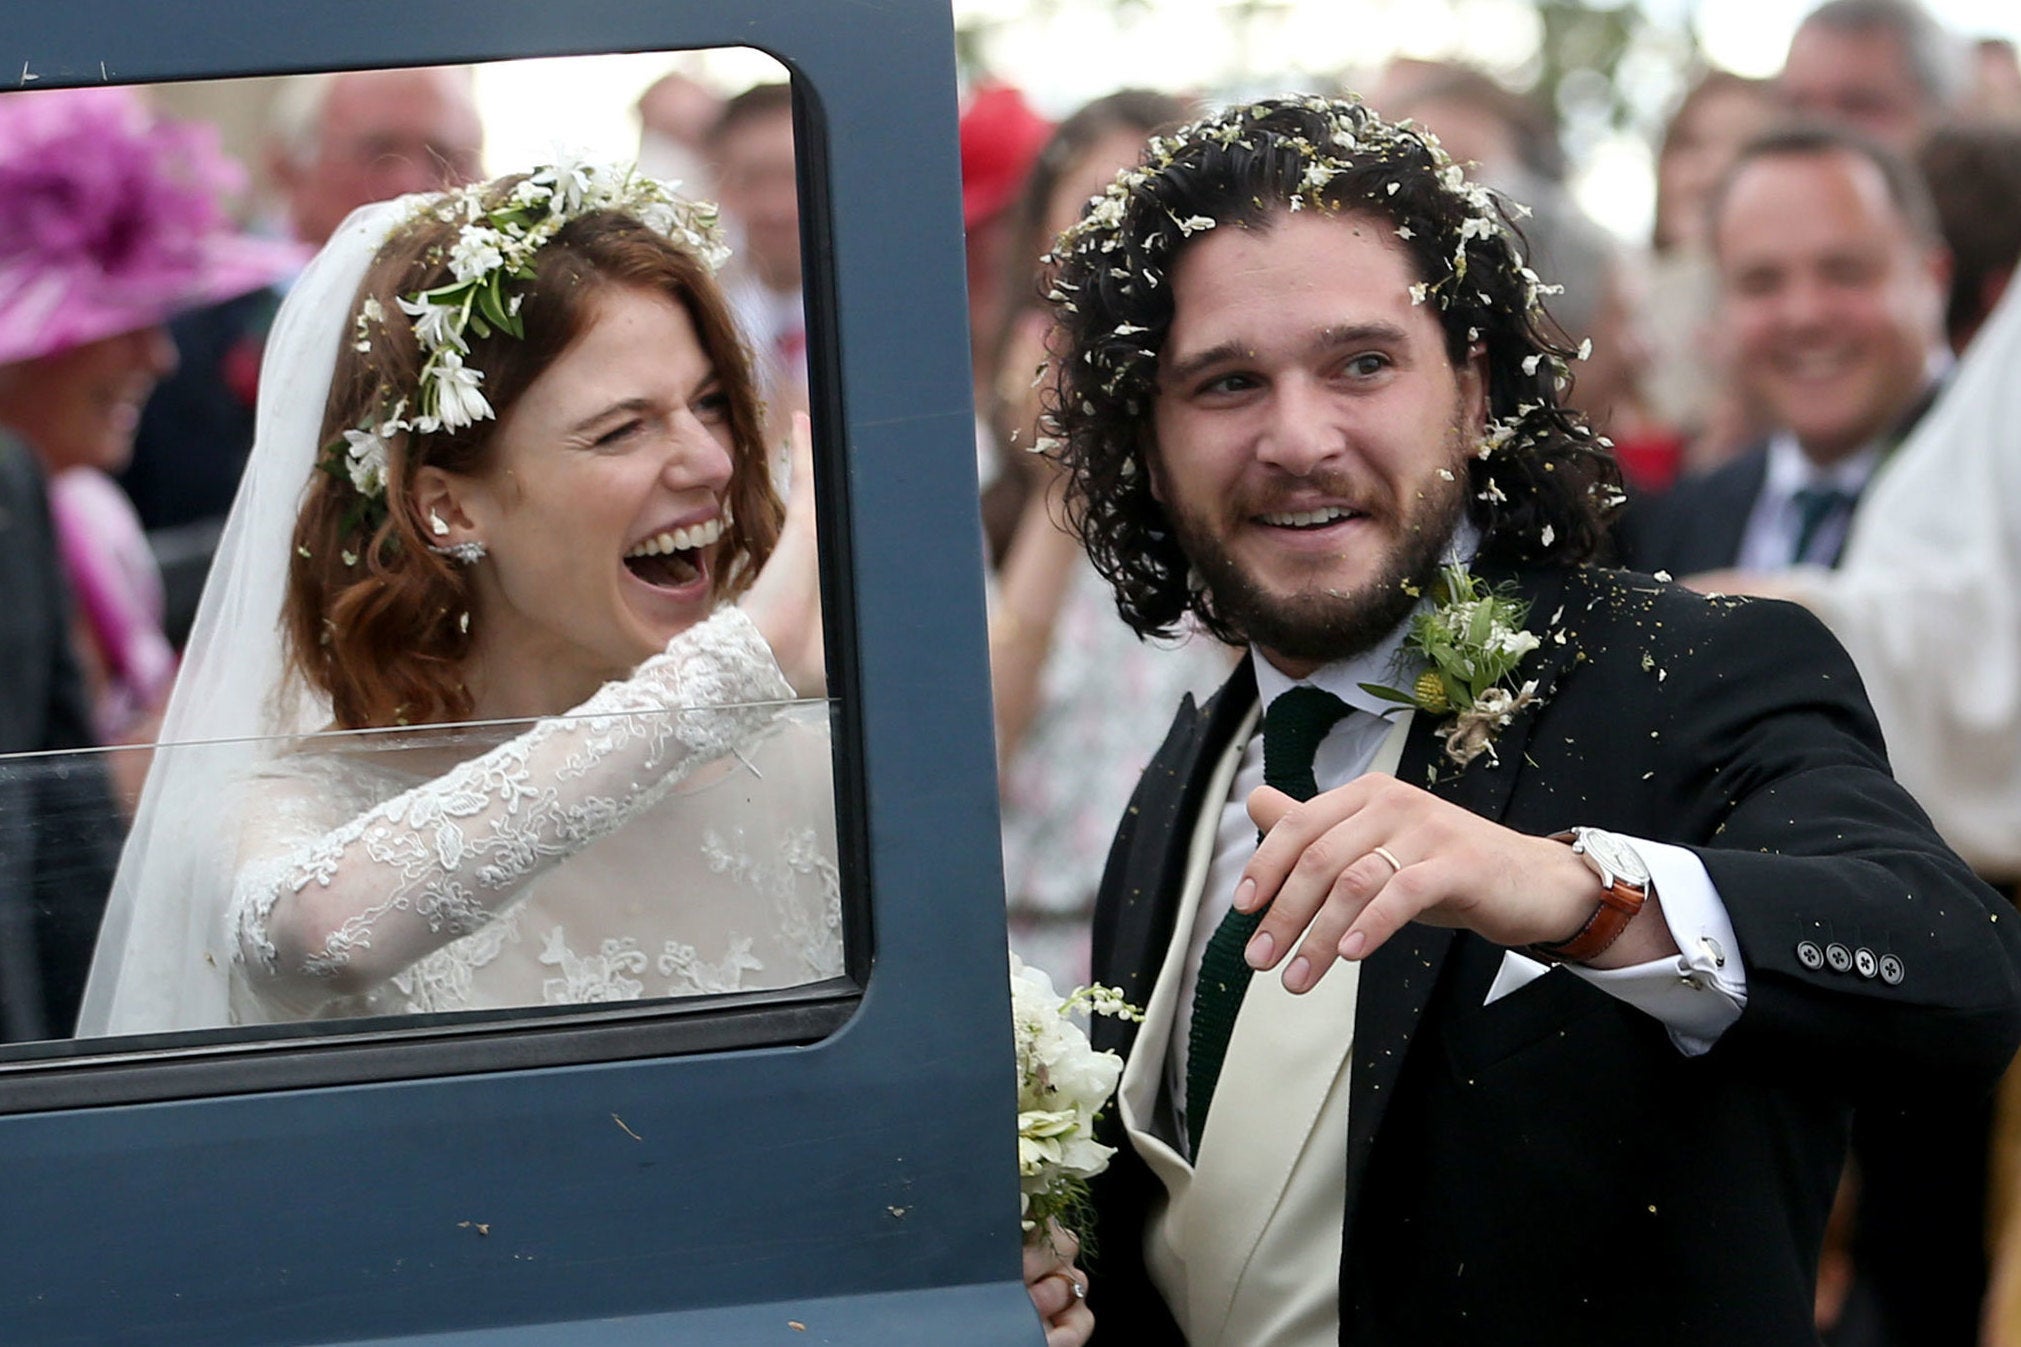 The couple met on the set of the HBO series as the characters Jon Snow and Ygritte